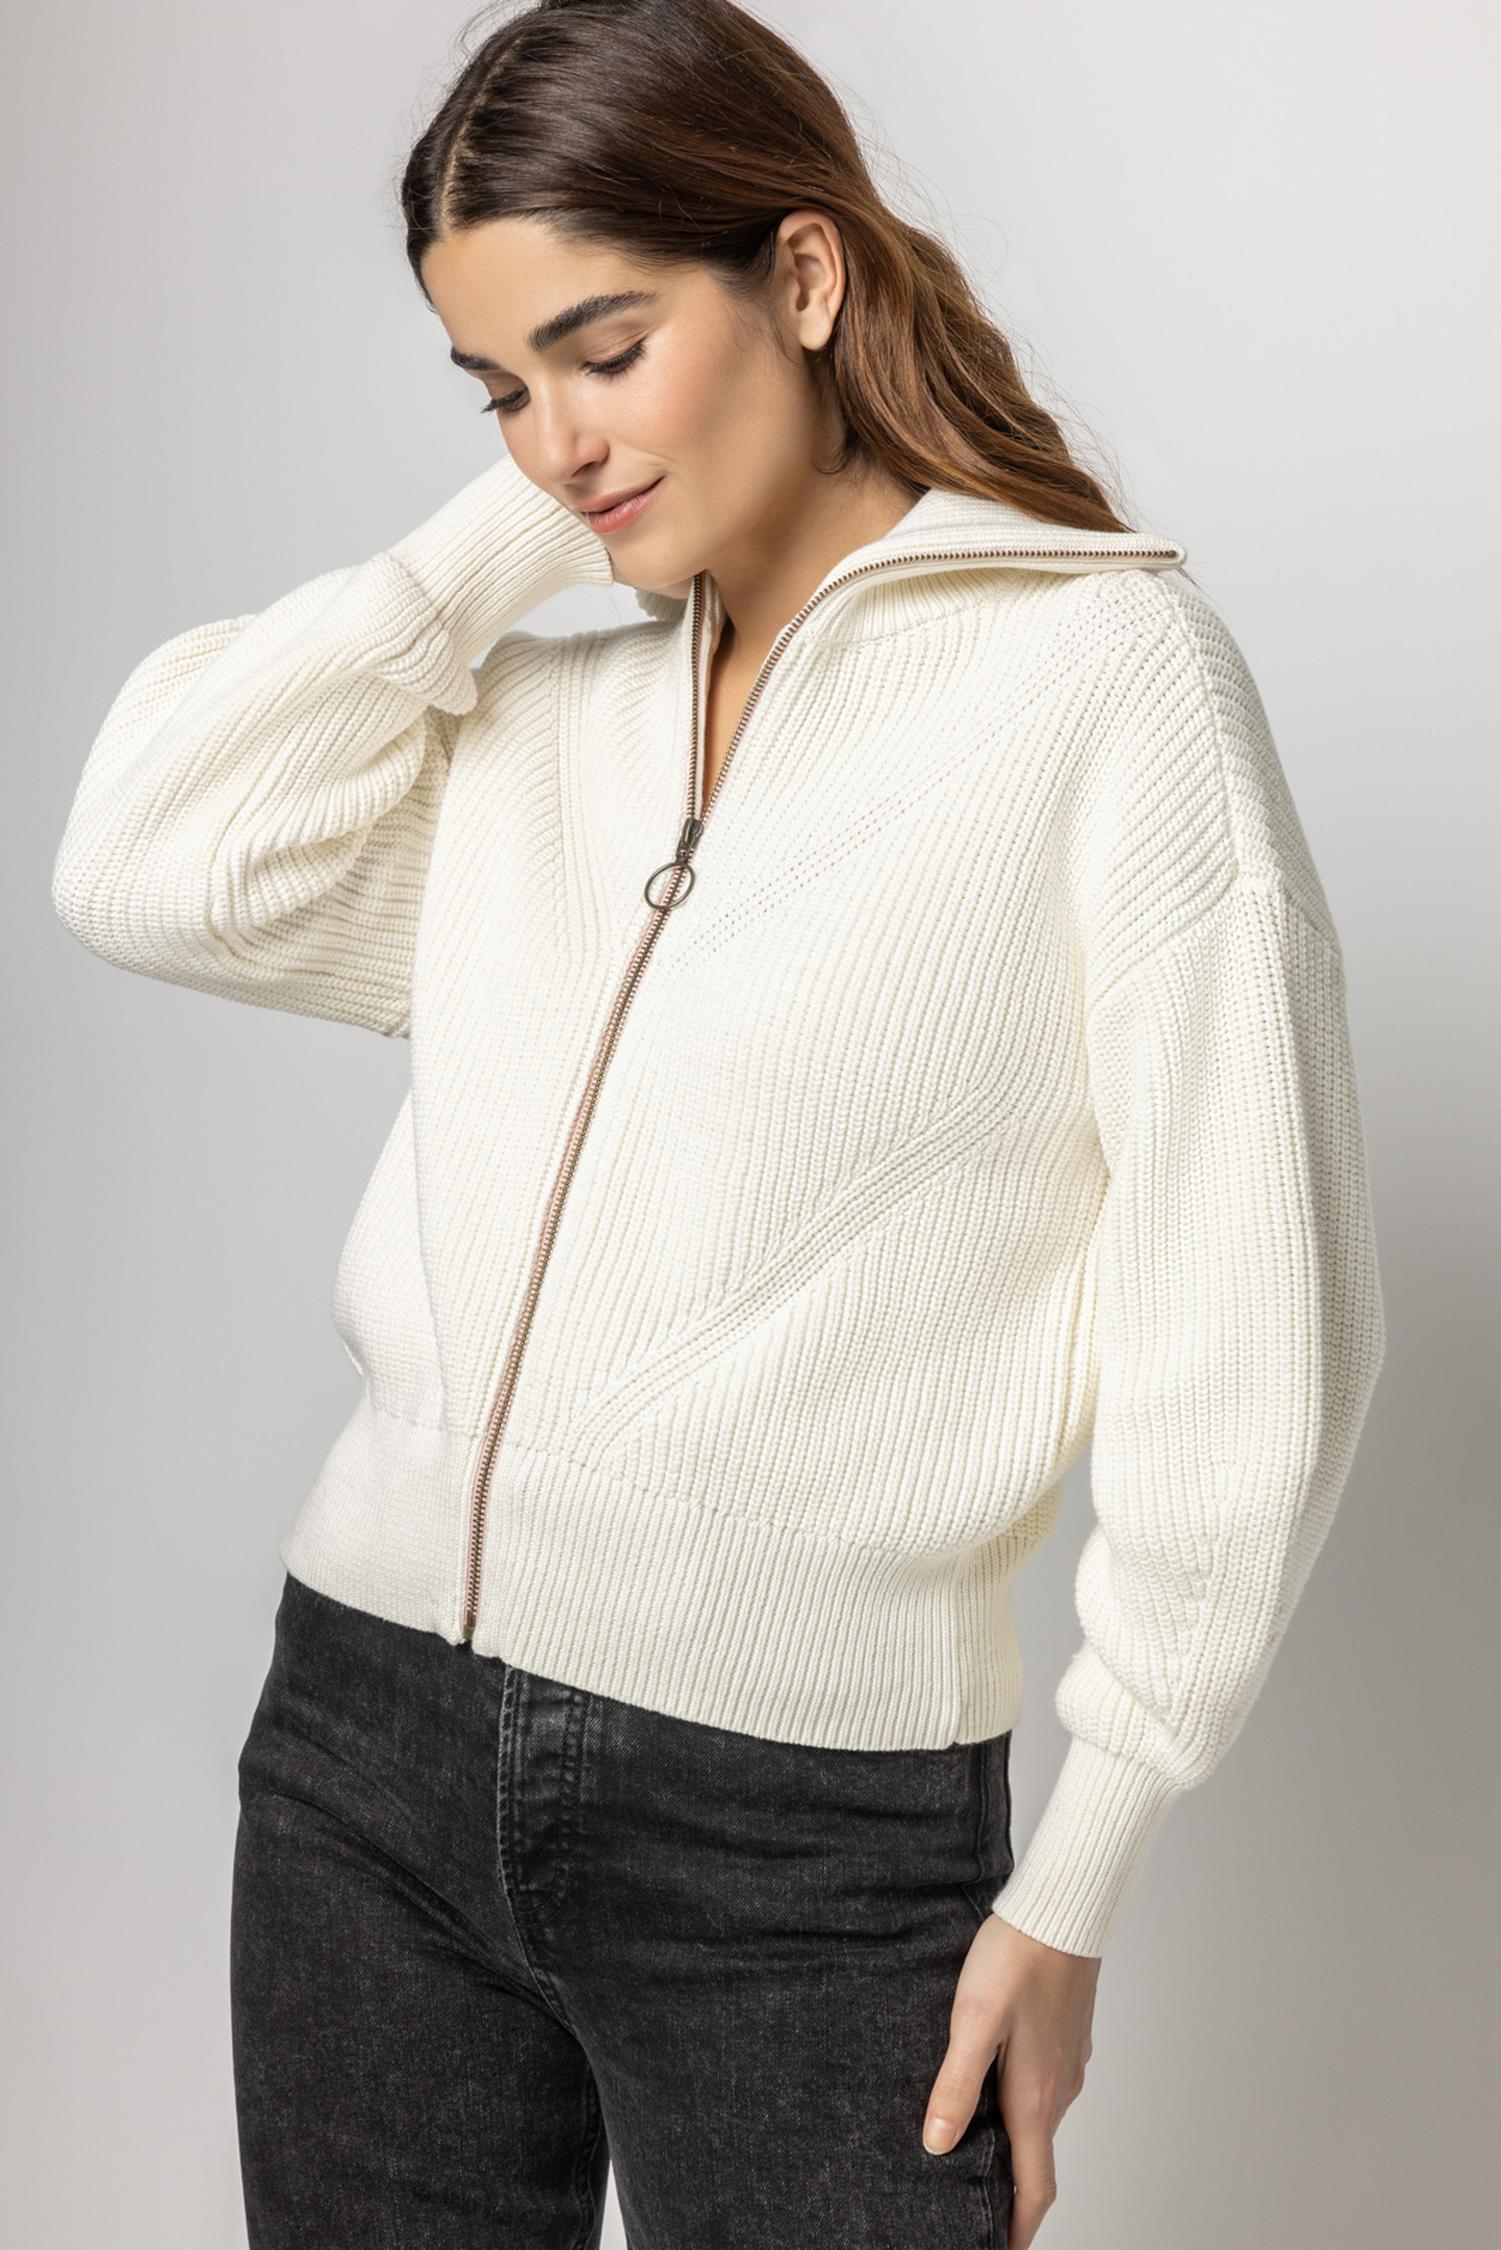 Zip Front Cardigan by Lilla P